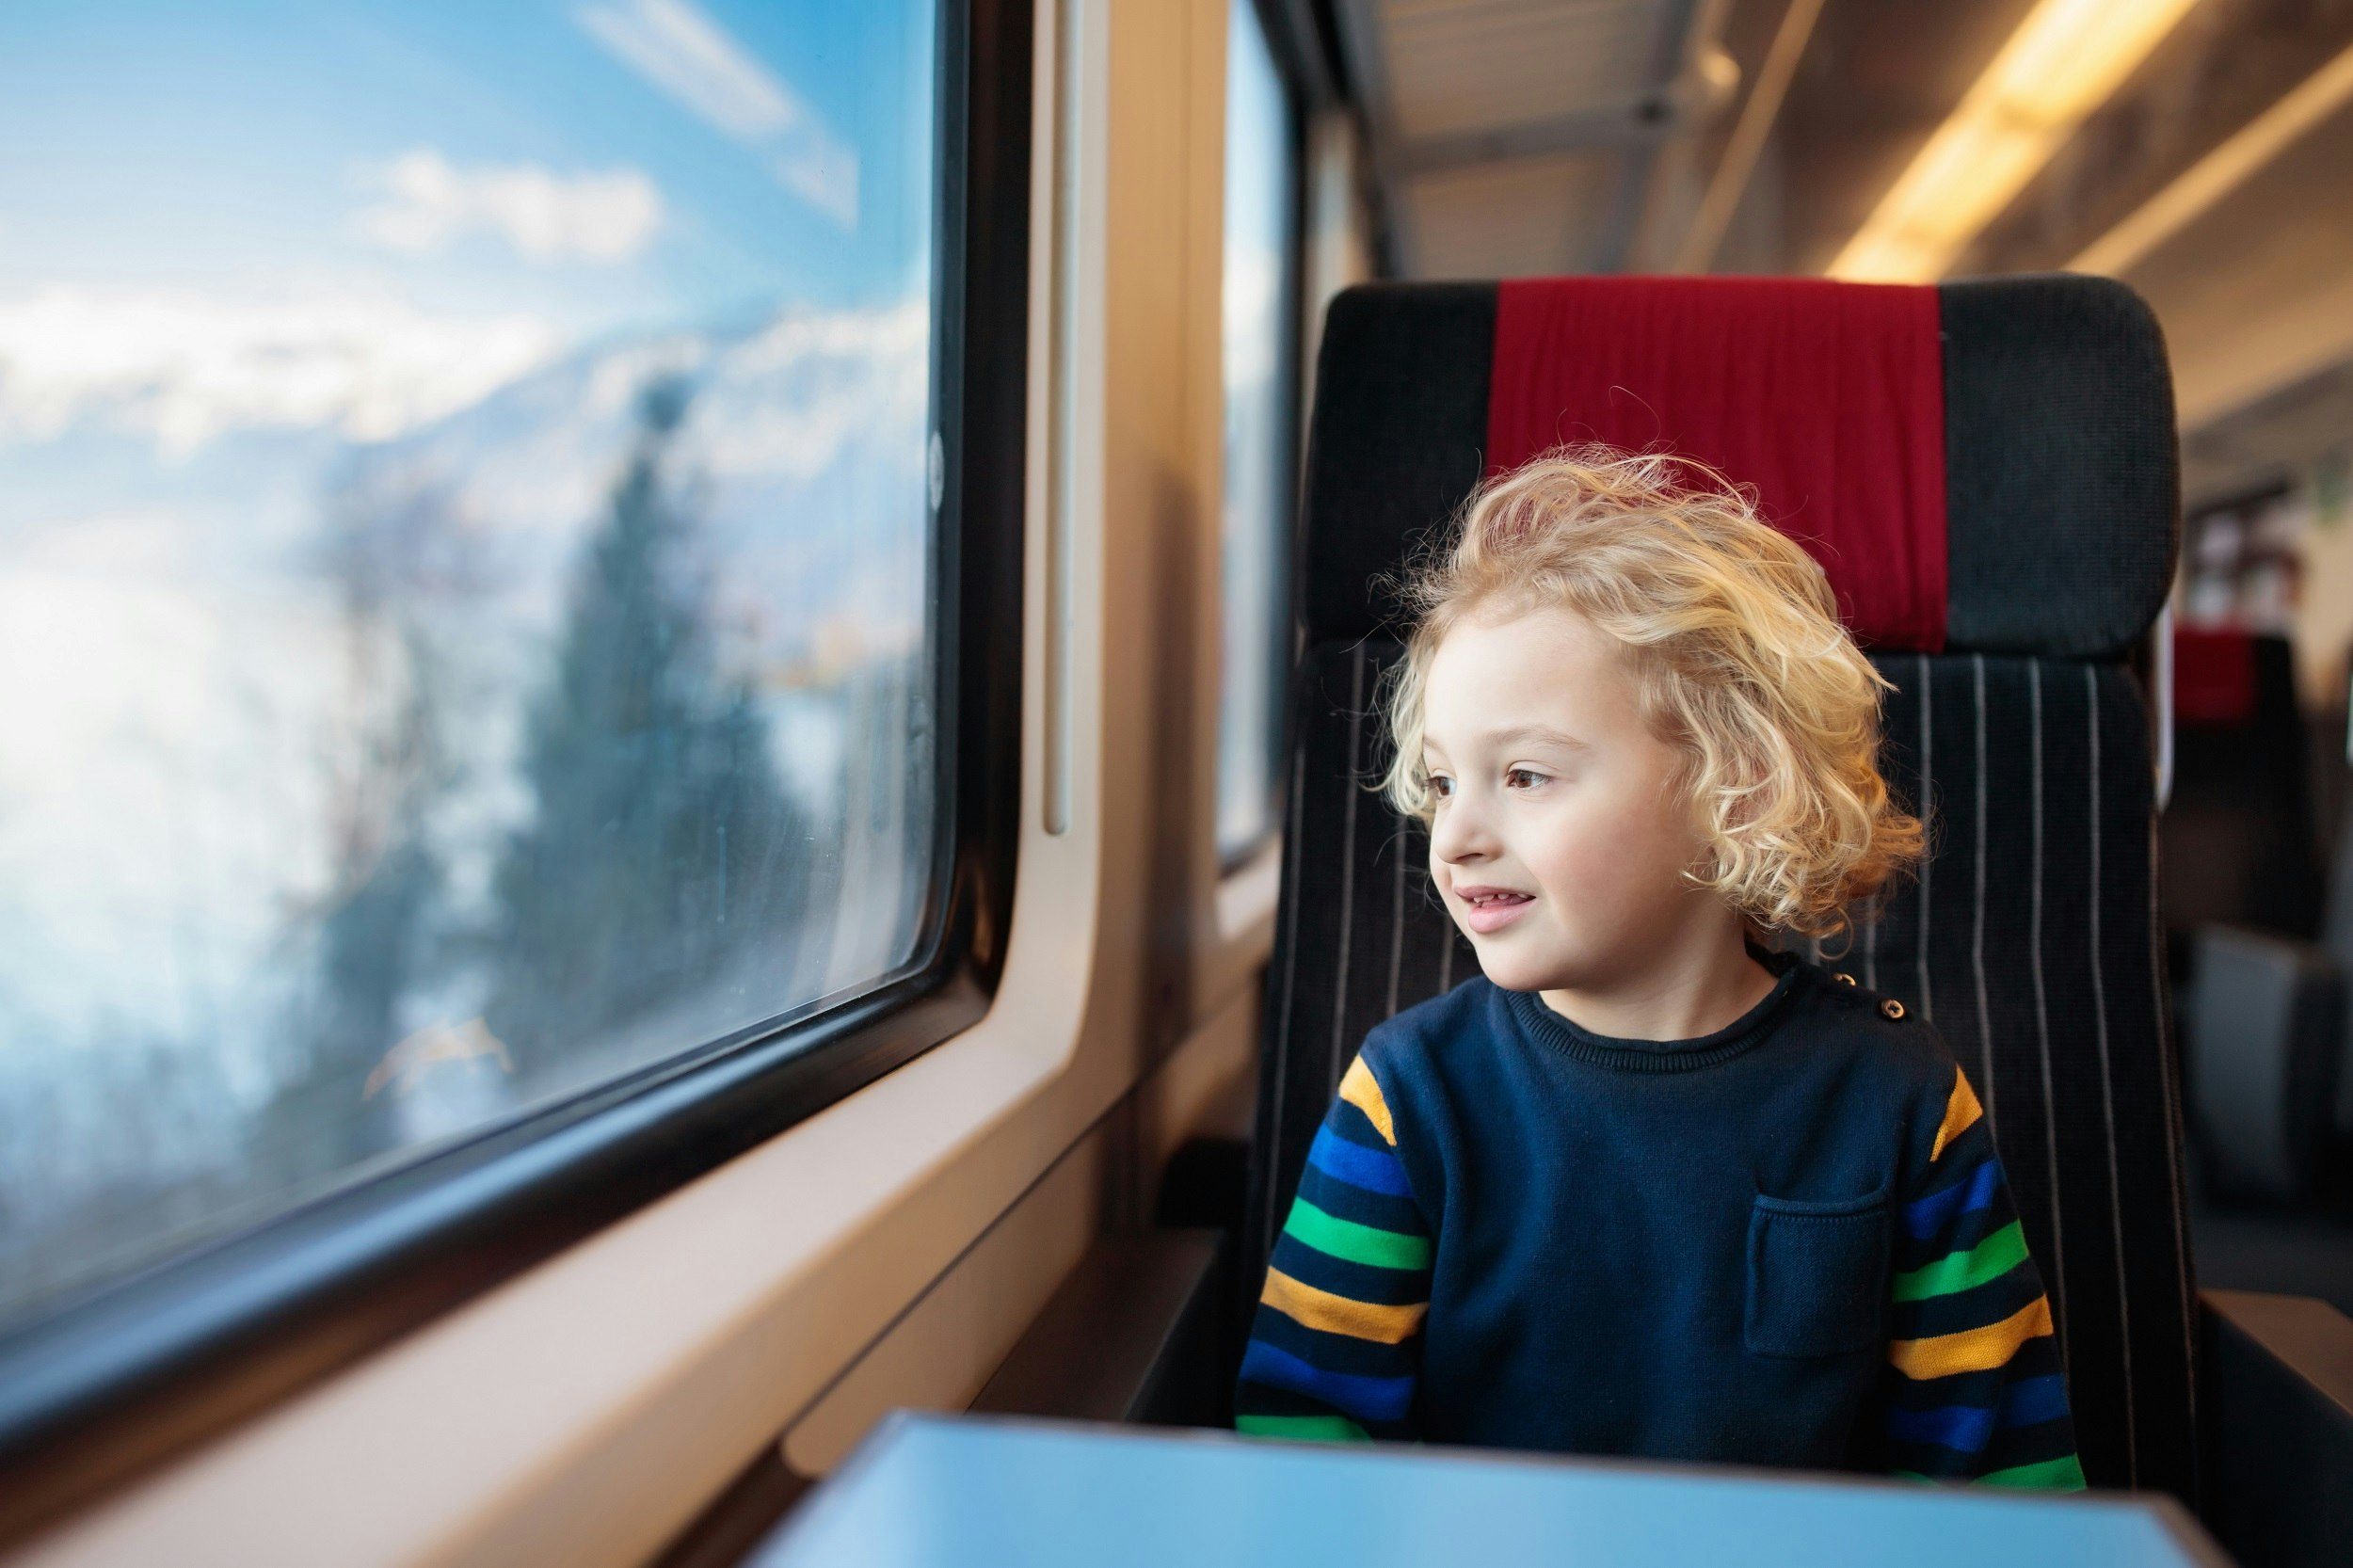 A young child sittings in a train seat and looks out to a snowy environment with a smile on her face.